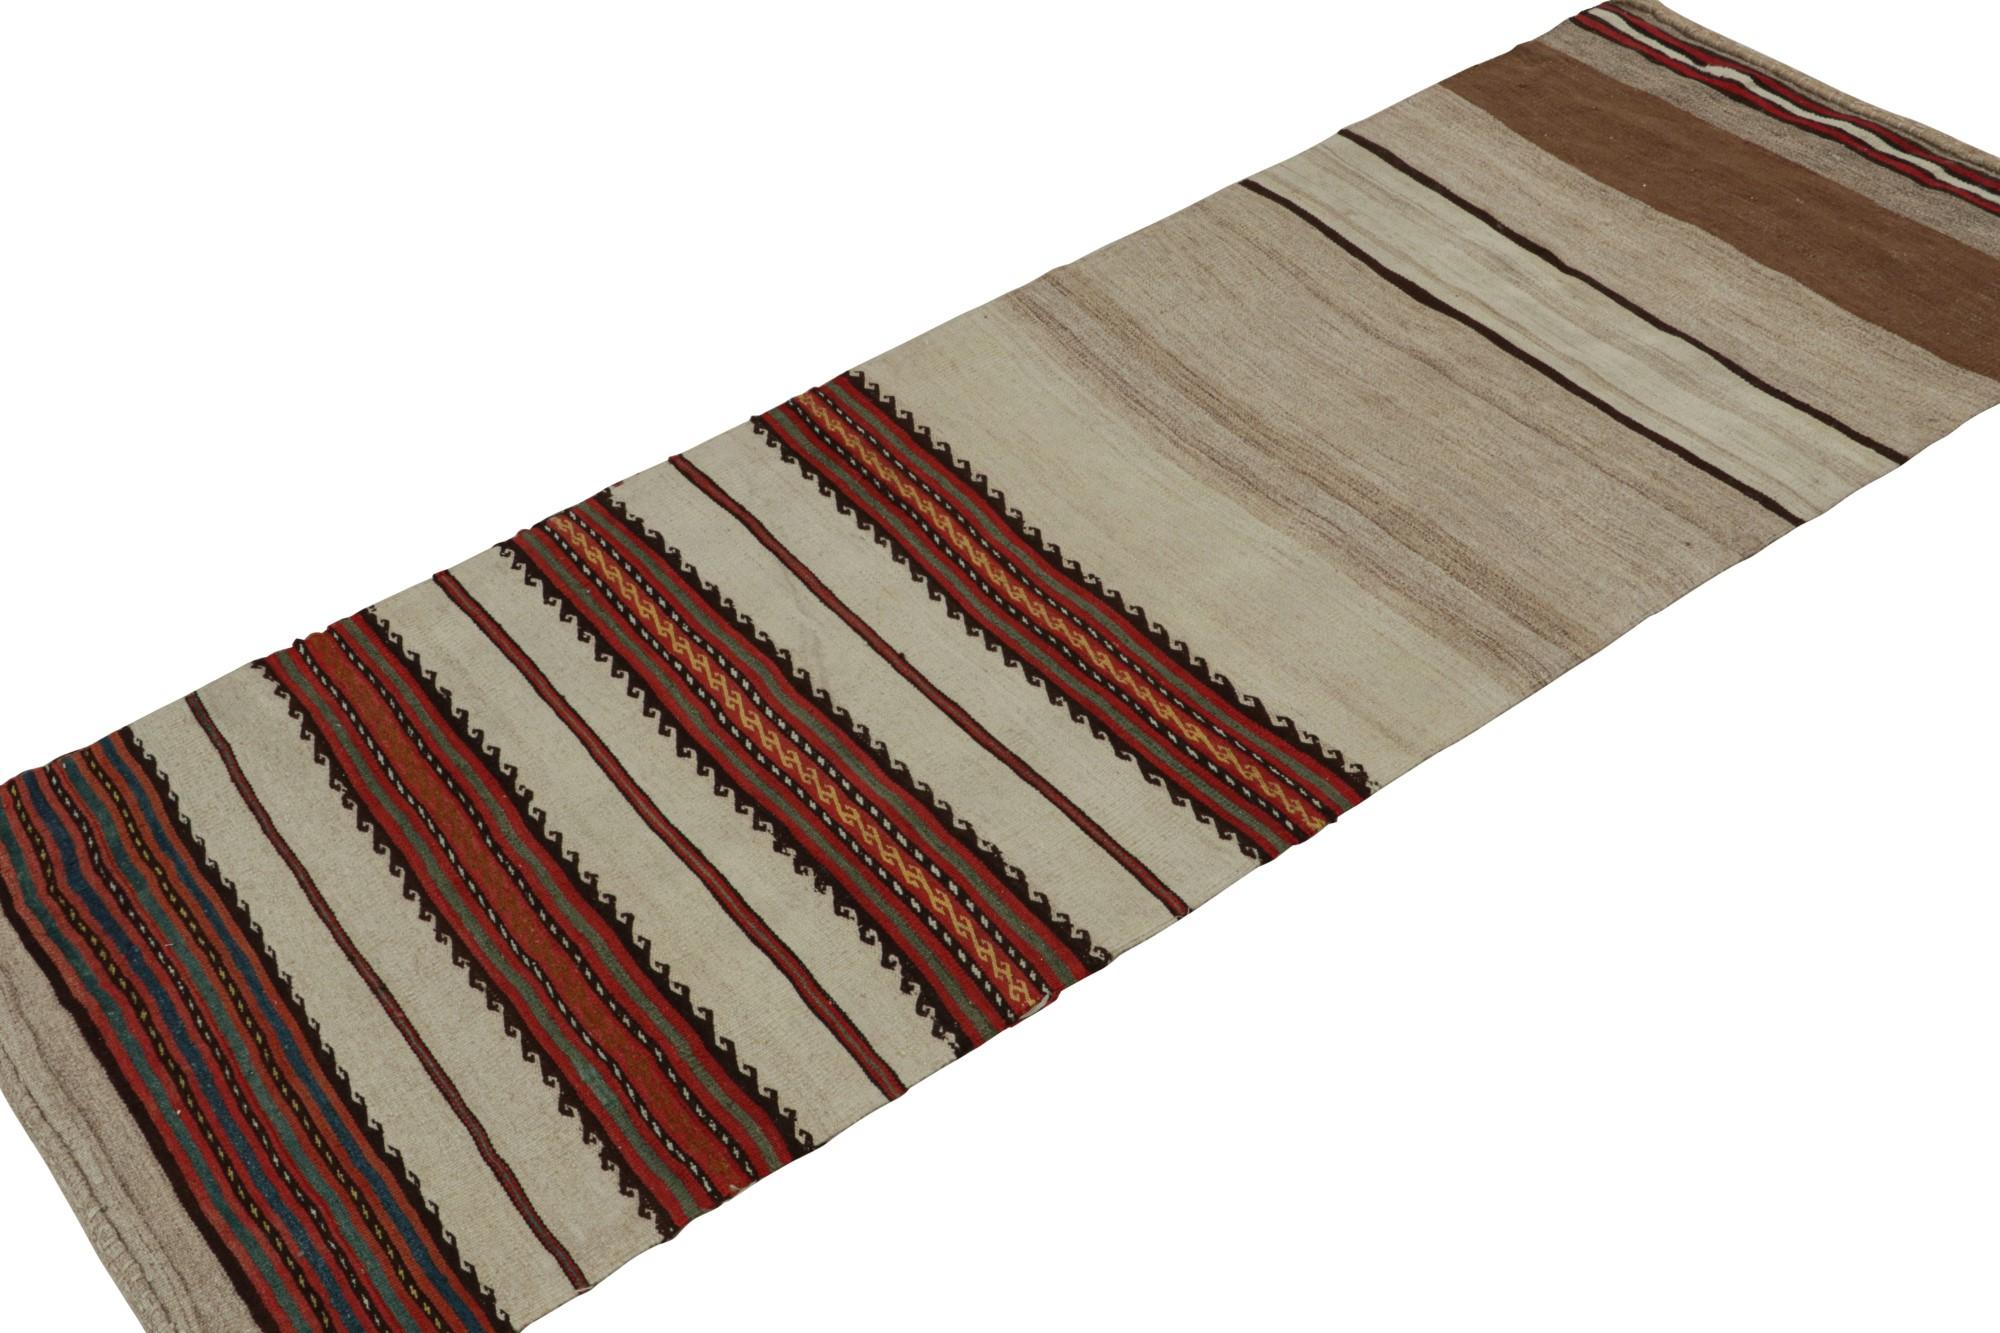 Handwoven in wool, this 2x7 vintage Afghan tribal kilim runner rug is an extraordinarily simple piece in beige with red stripes and a simple presence. 

On the Design: 

The minimalist design prefers geometric stripes in rich beige/brown and red